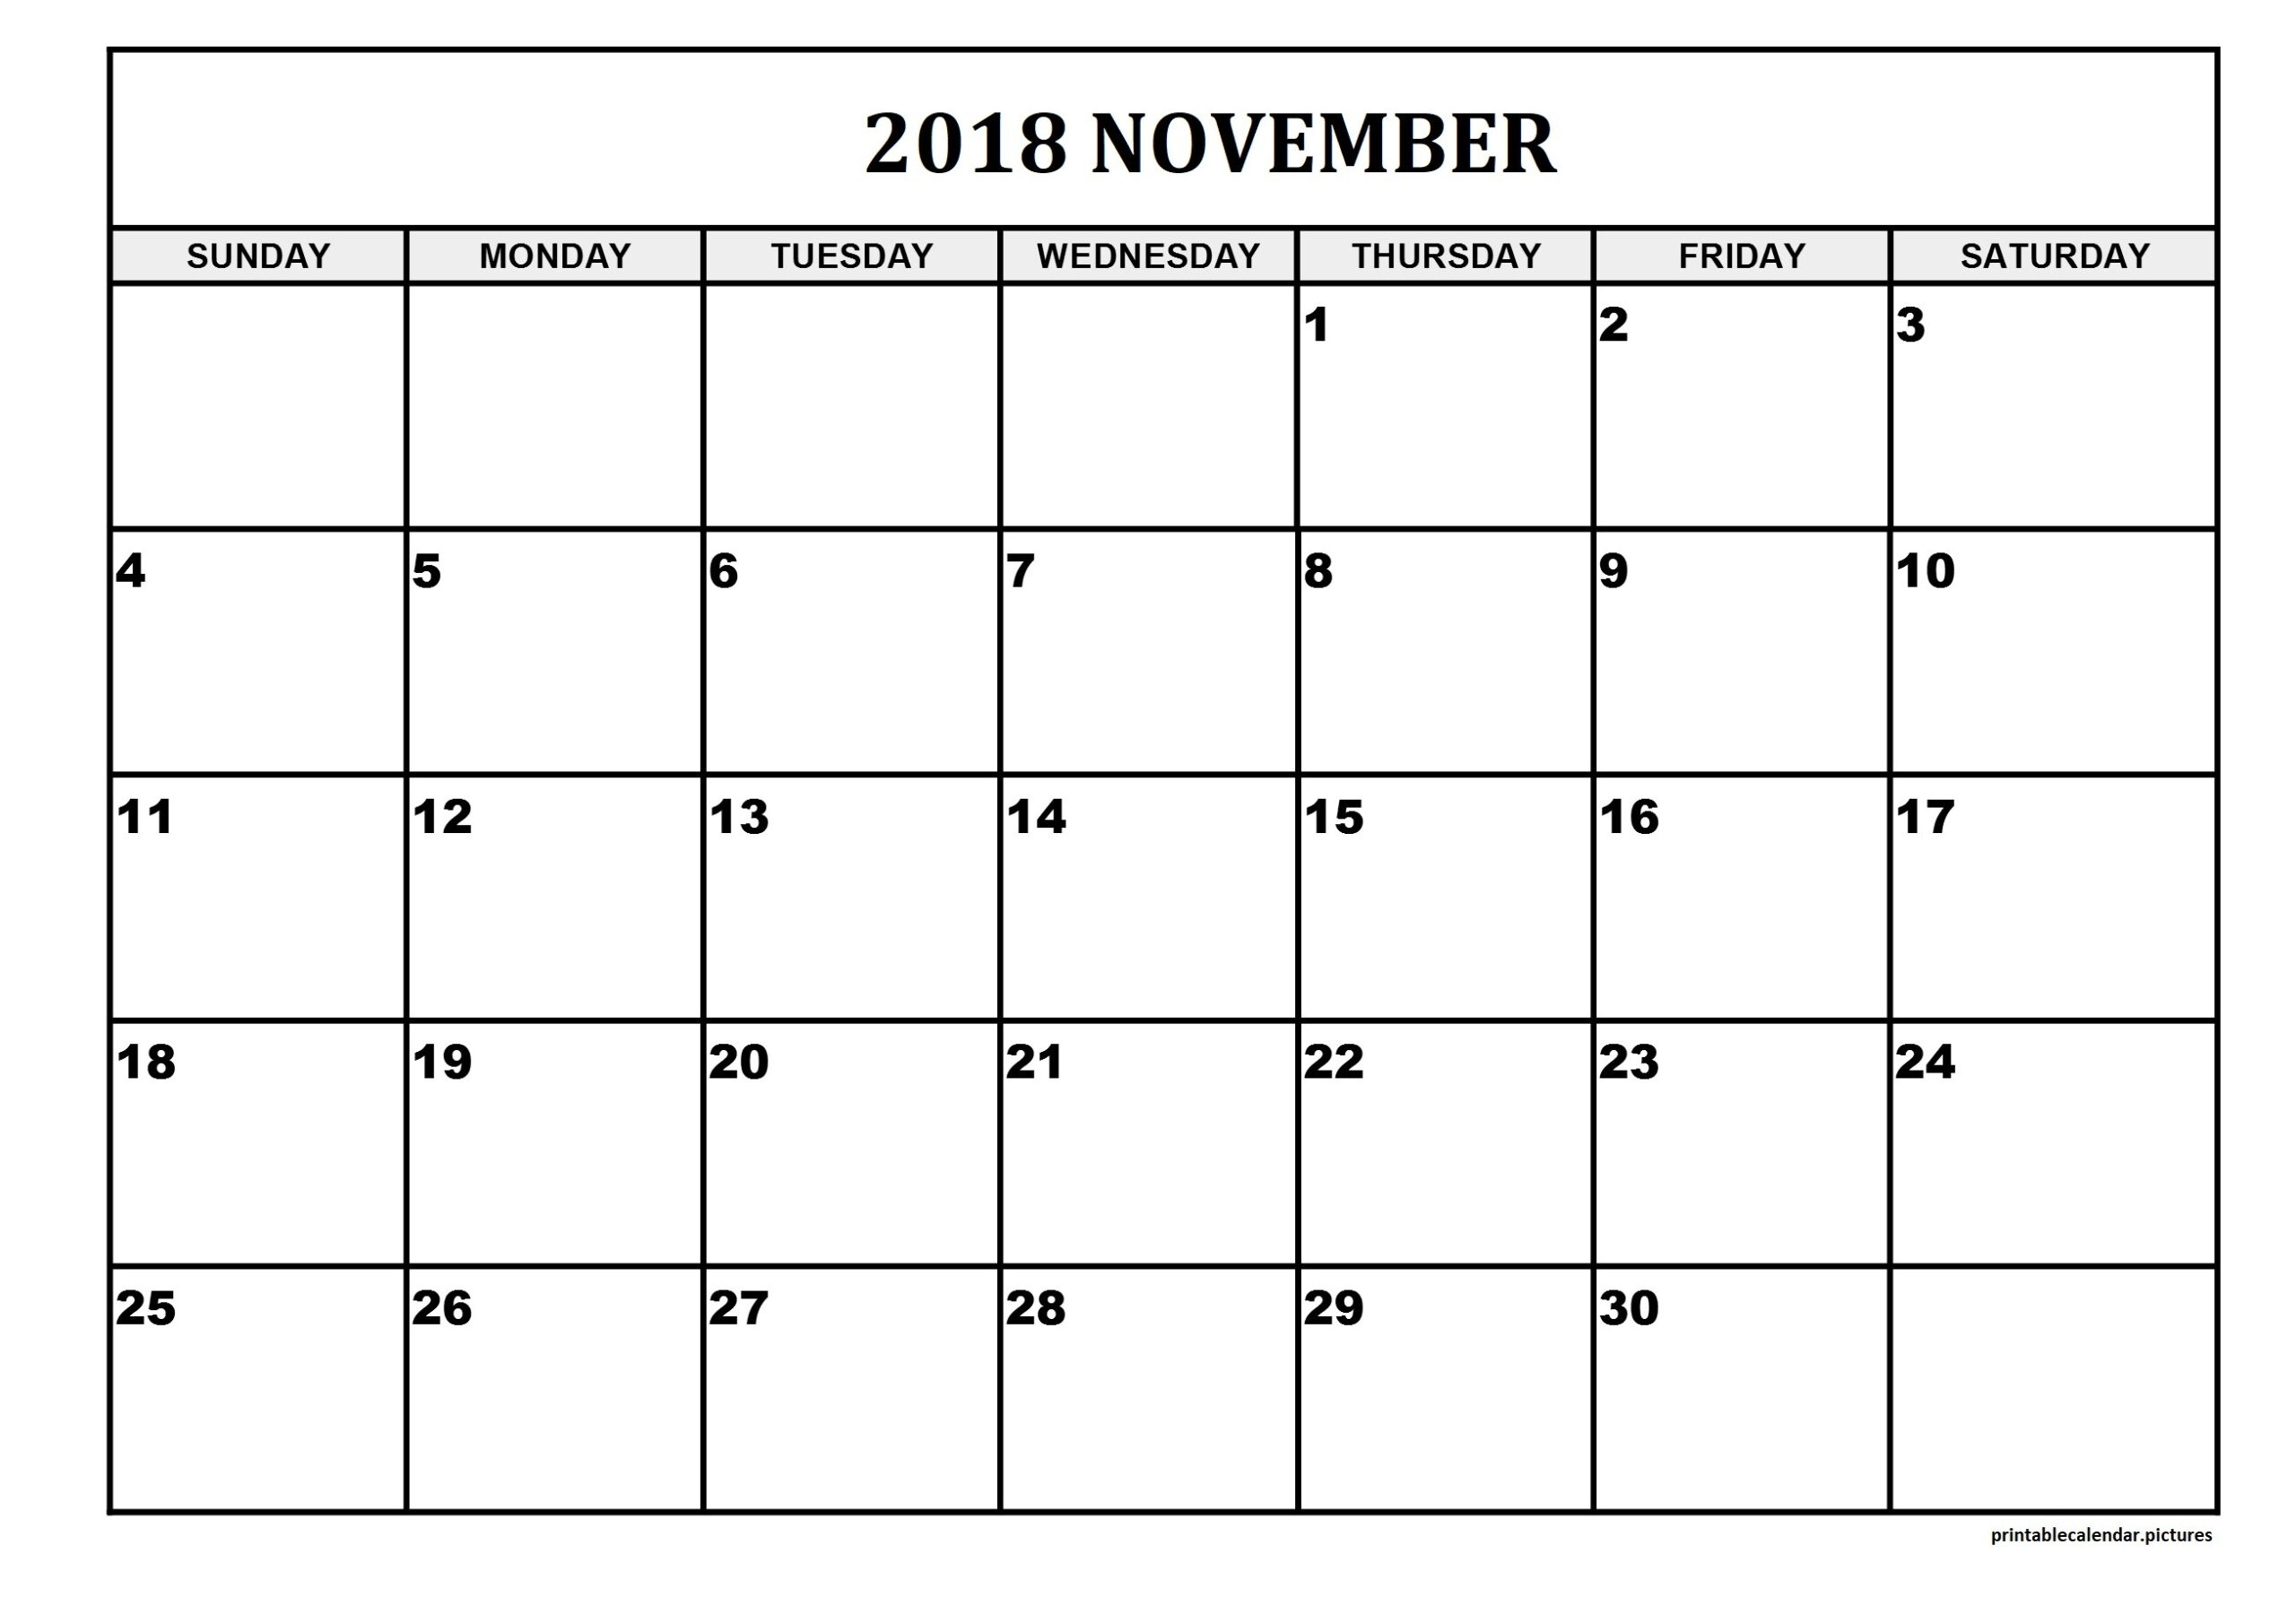 Printable Calendar Large Squares | Calendar Printables Free Templates with Downloaded Calendar With Large Squares